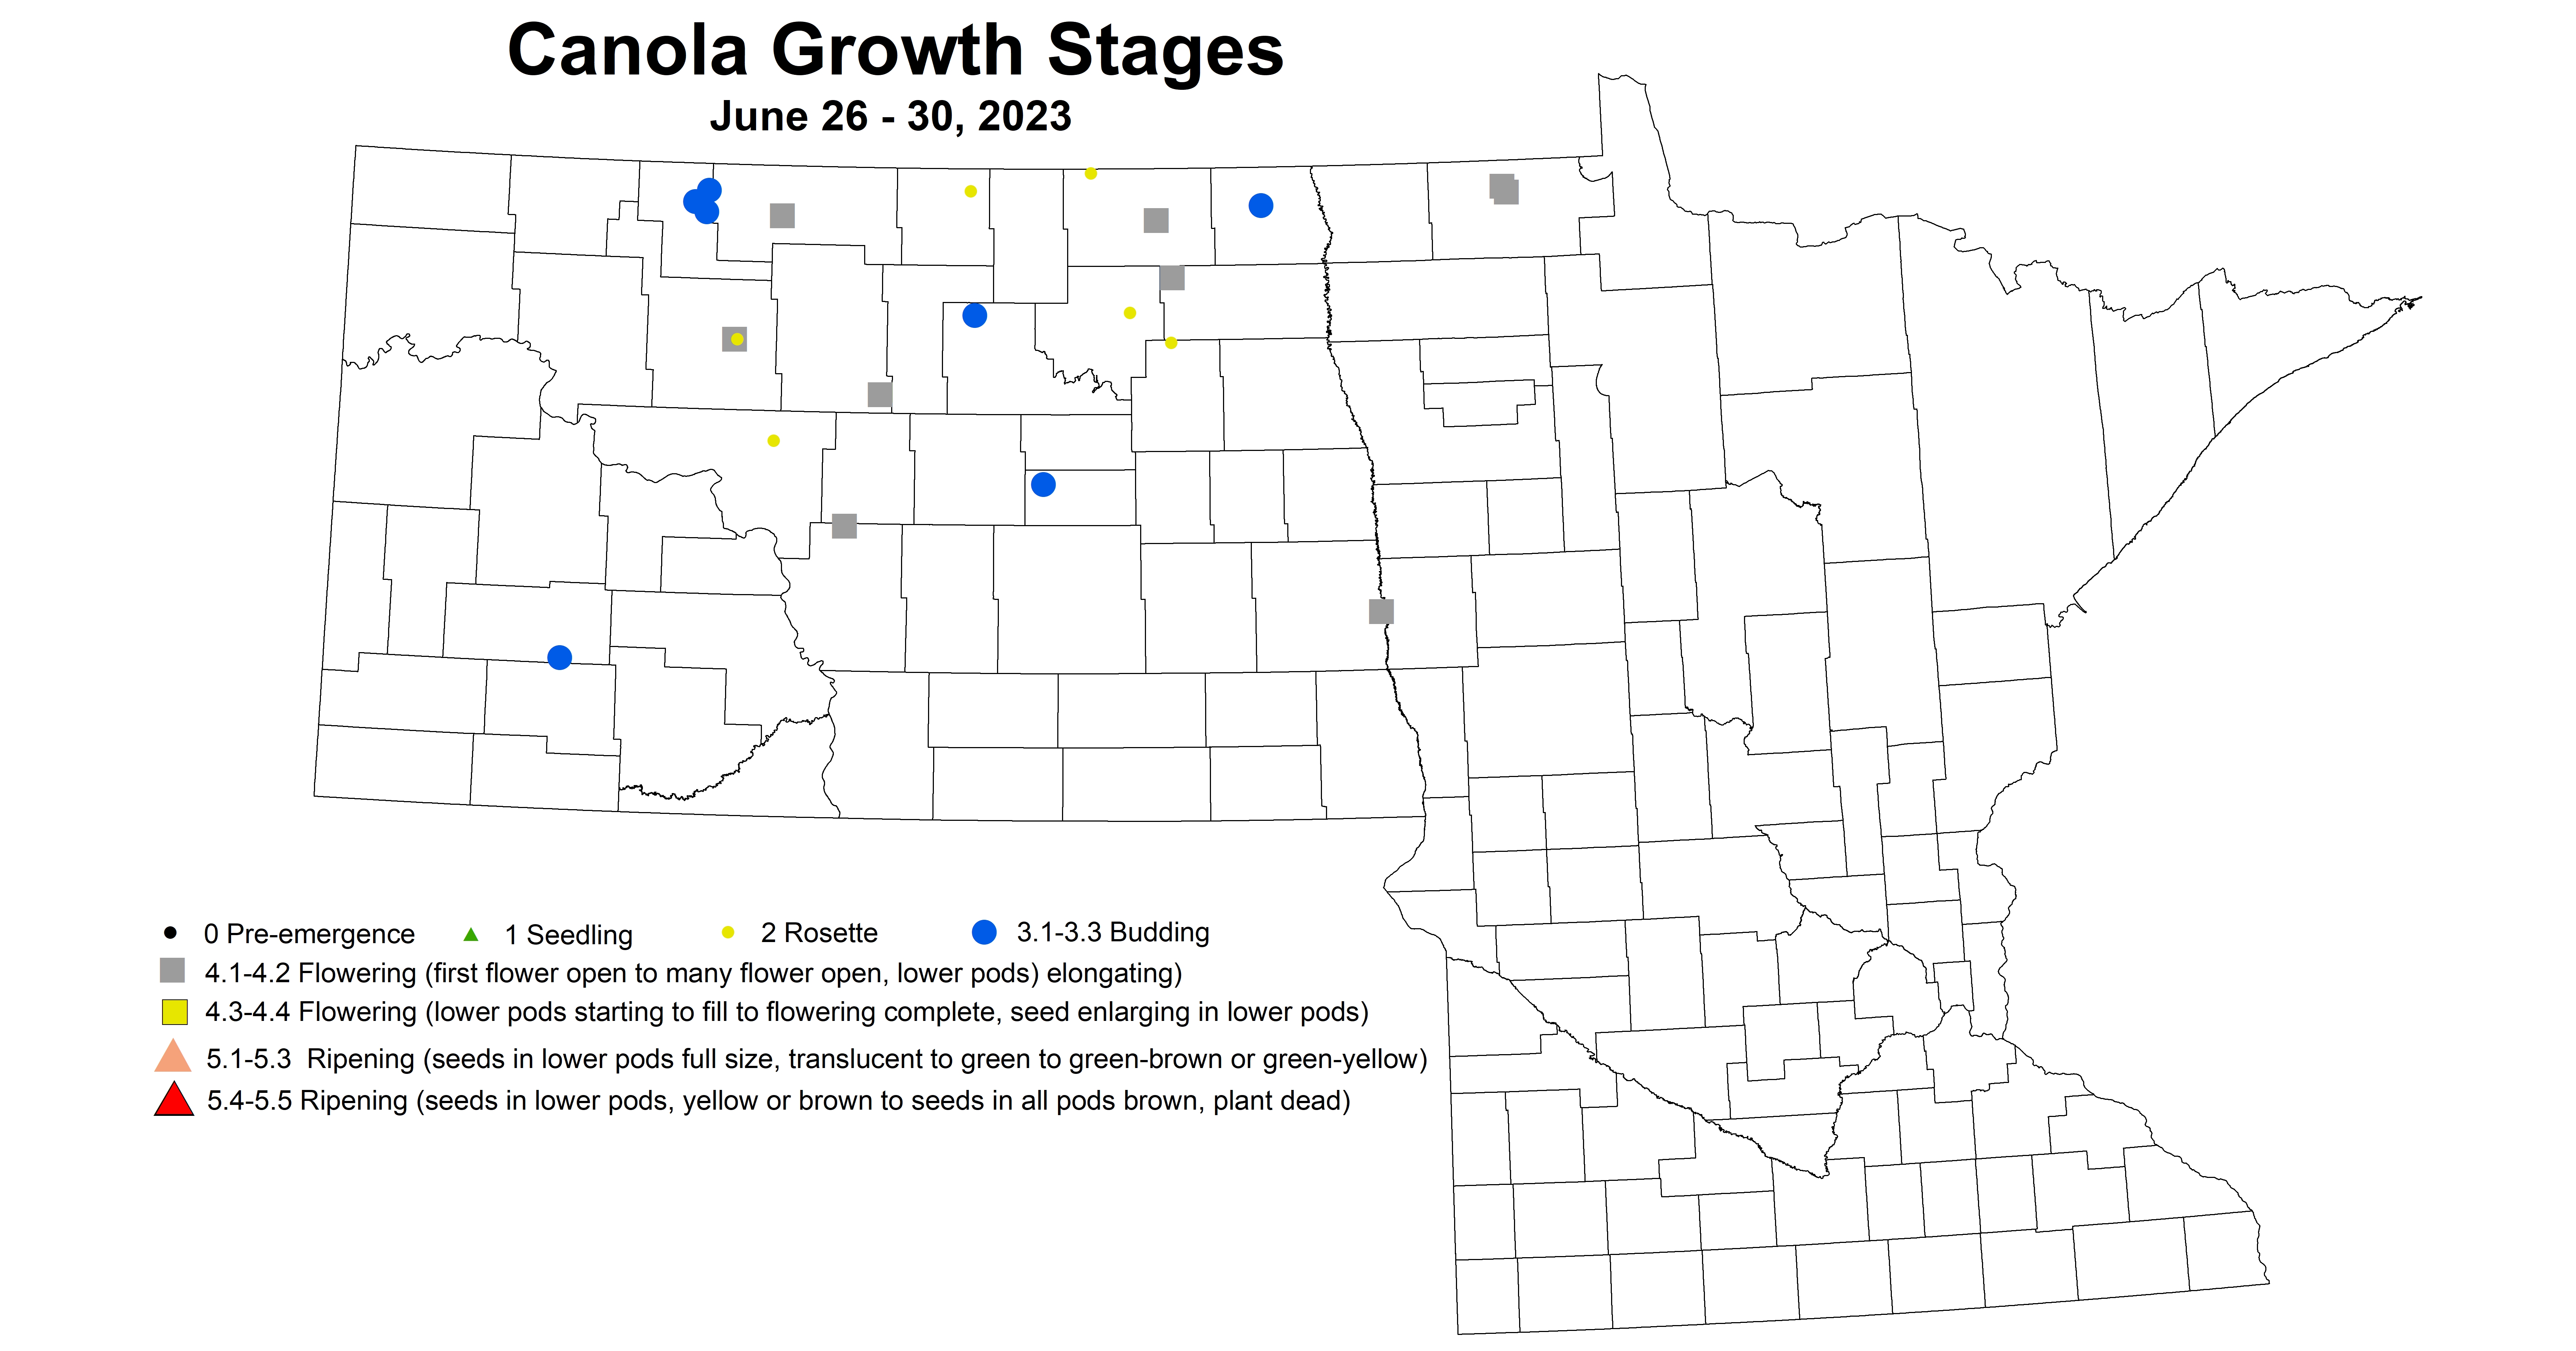 canola growth stages June 26-30 2023